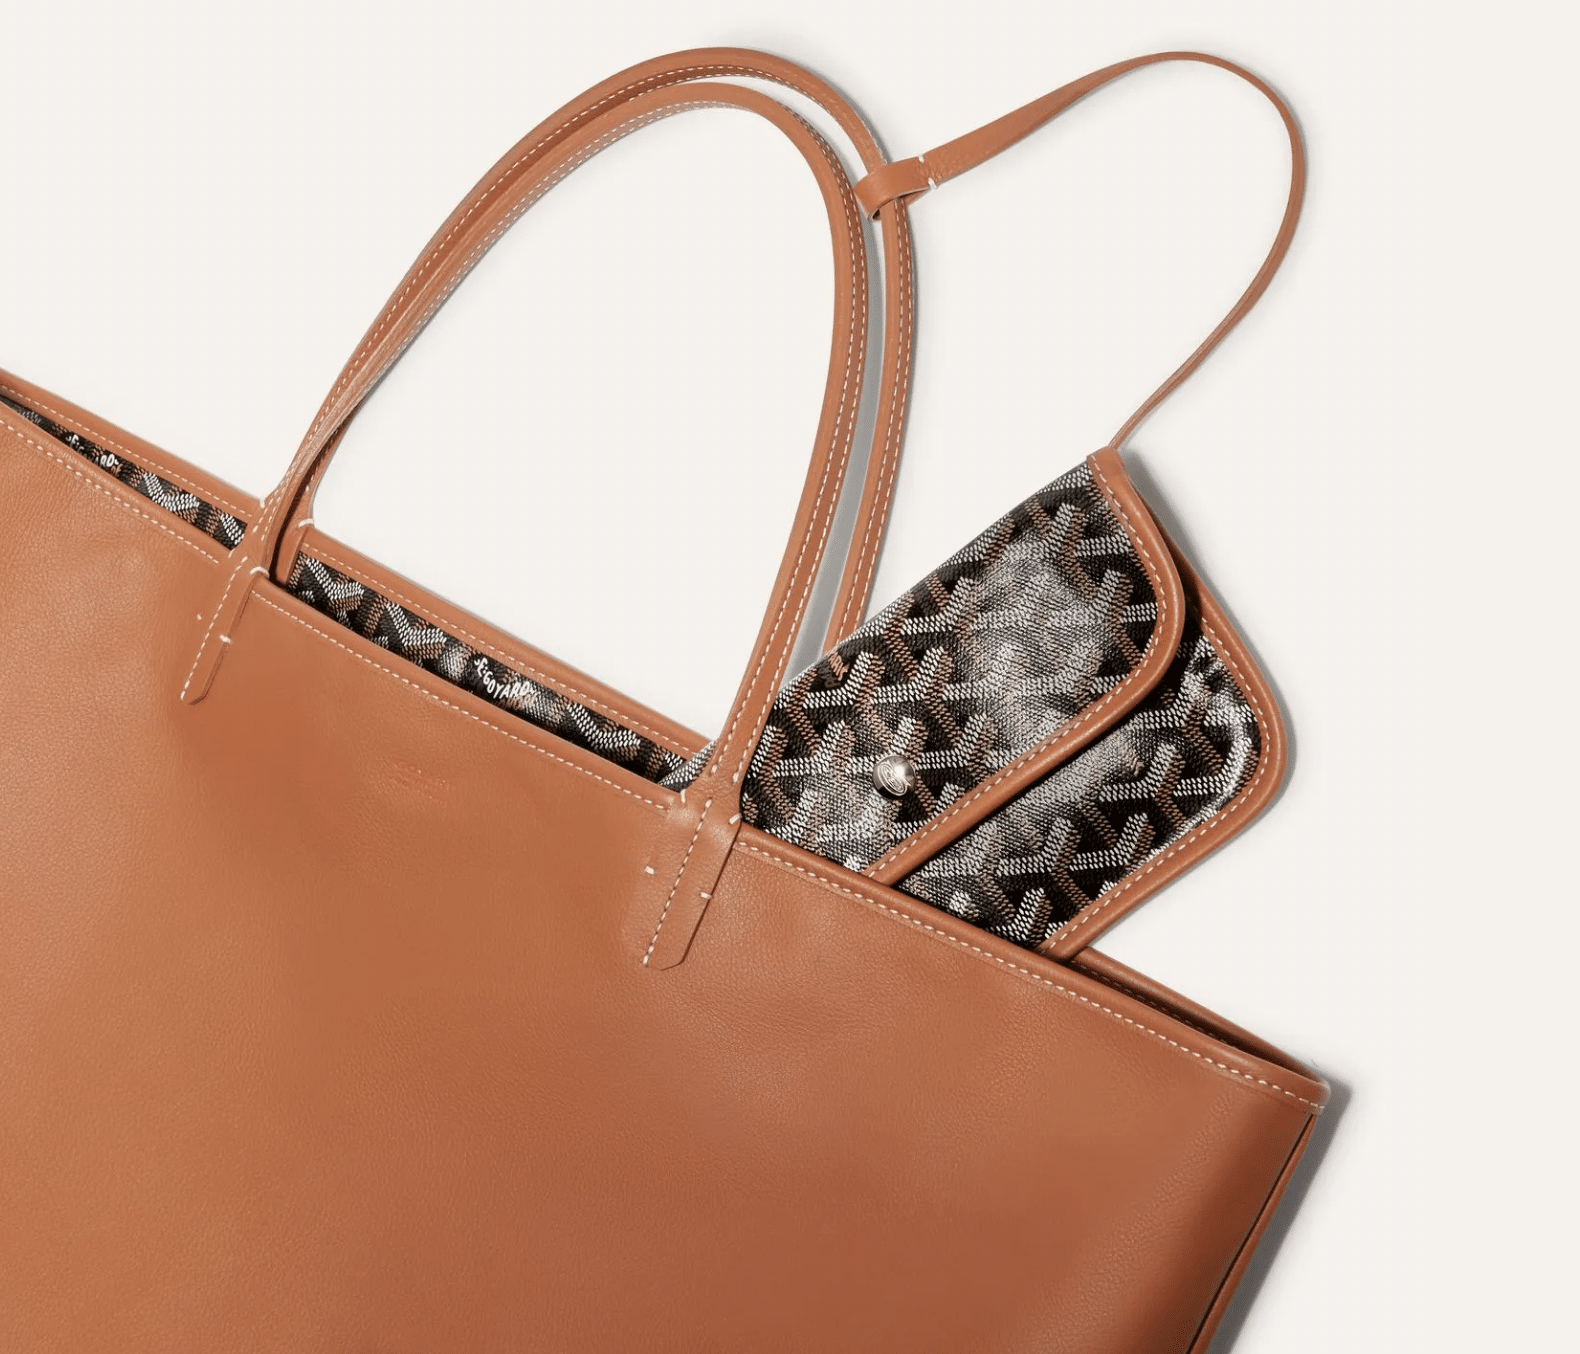 Read more about the article Goyard Tote: The Difference Between All Glorious Goyard Totes Available on the Market Today